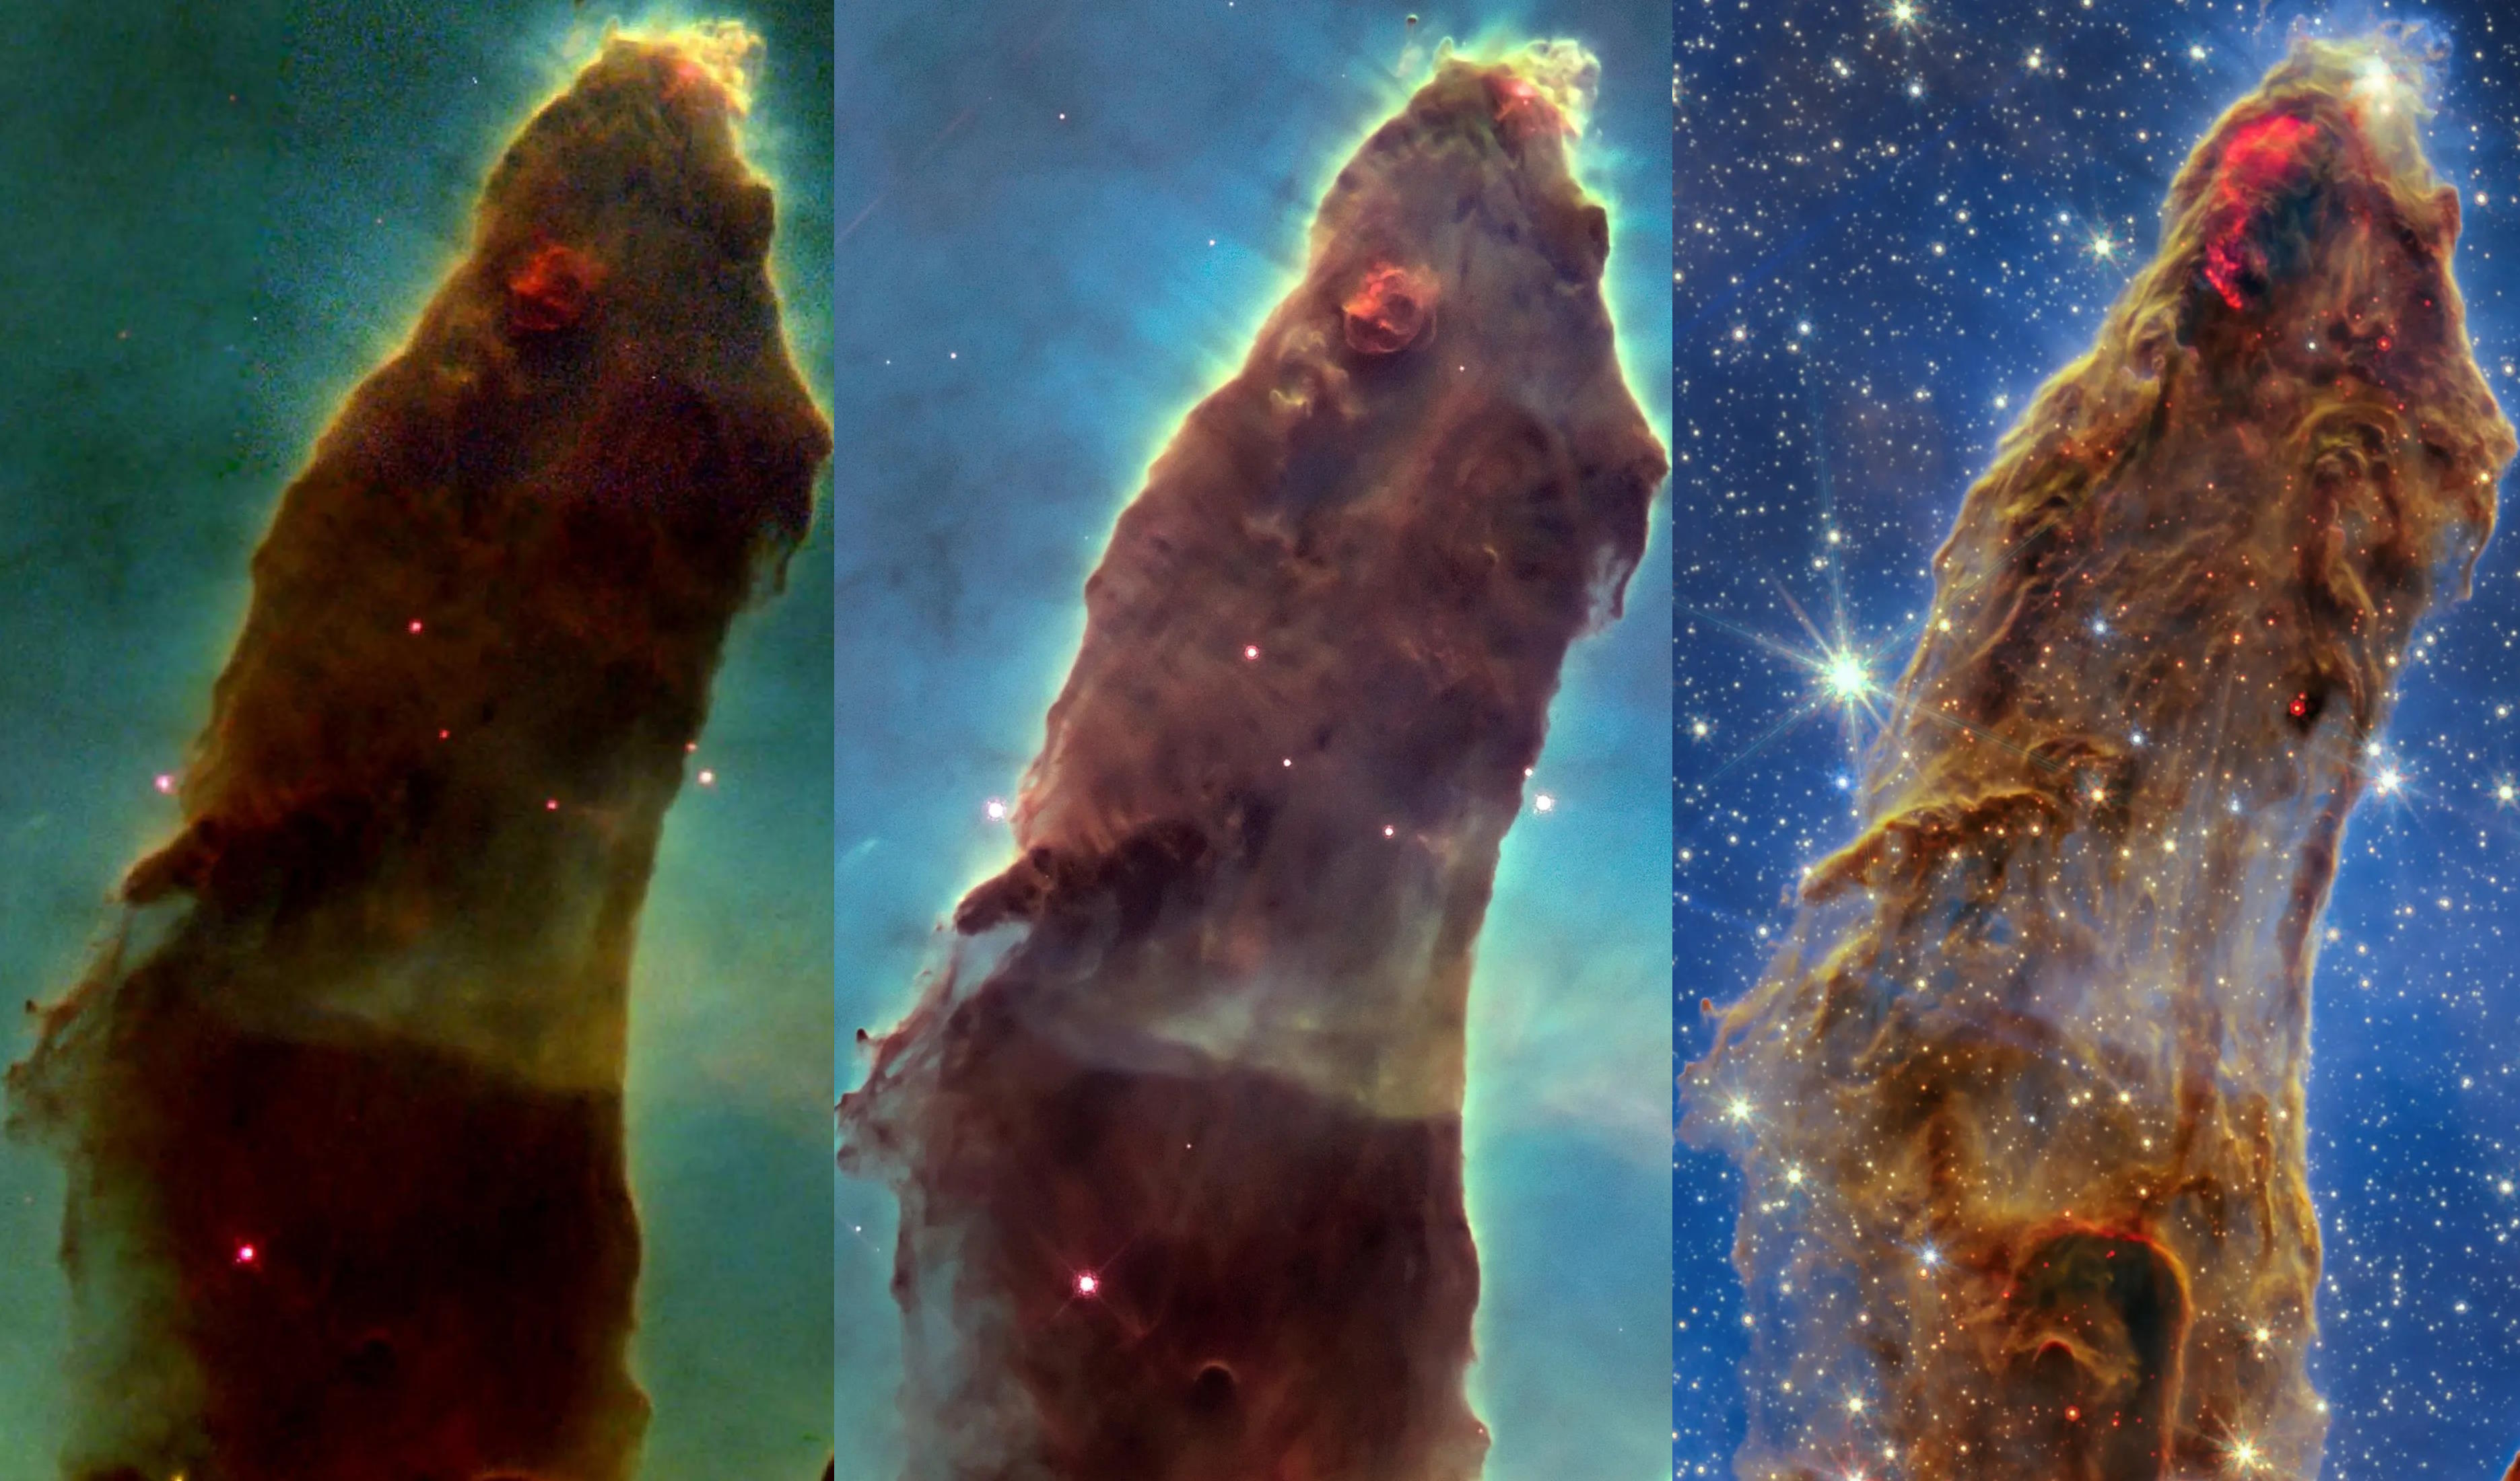 Three images of the same celestial pillar in the Eagle Nebula, known as the Pillars of Creation, captured by the Hubble (left, center) and James Webb (right) telescopes, show gradual detail and color shift from green to blue across the star field.